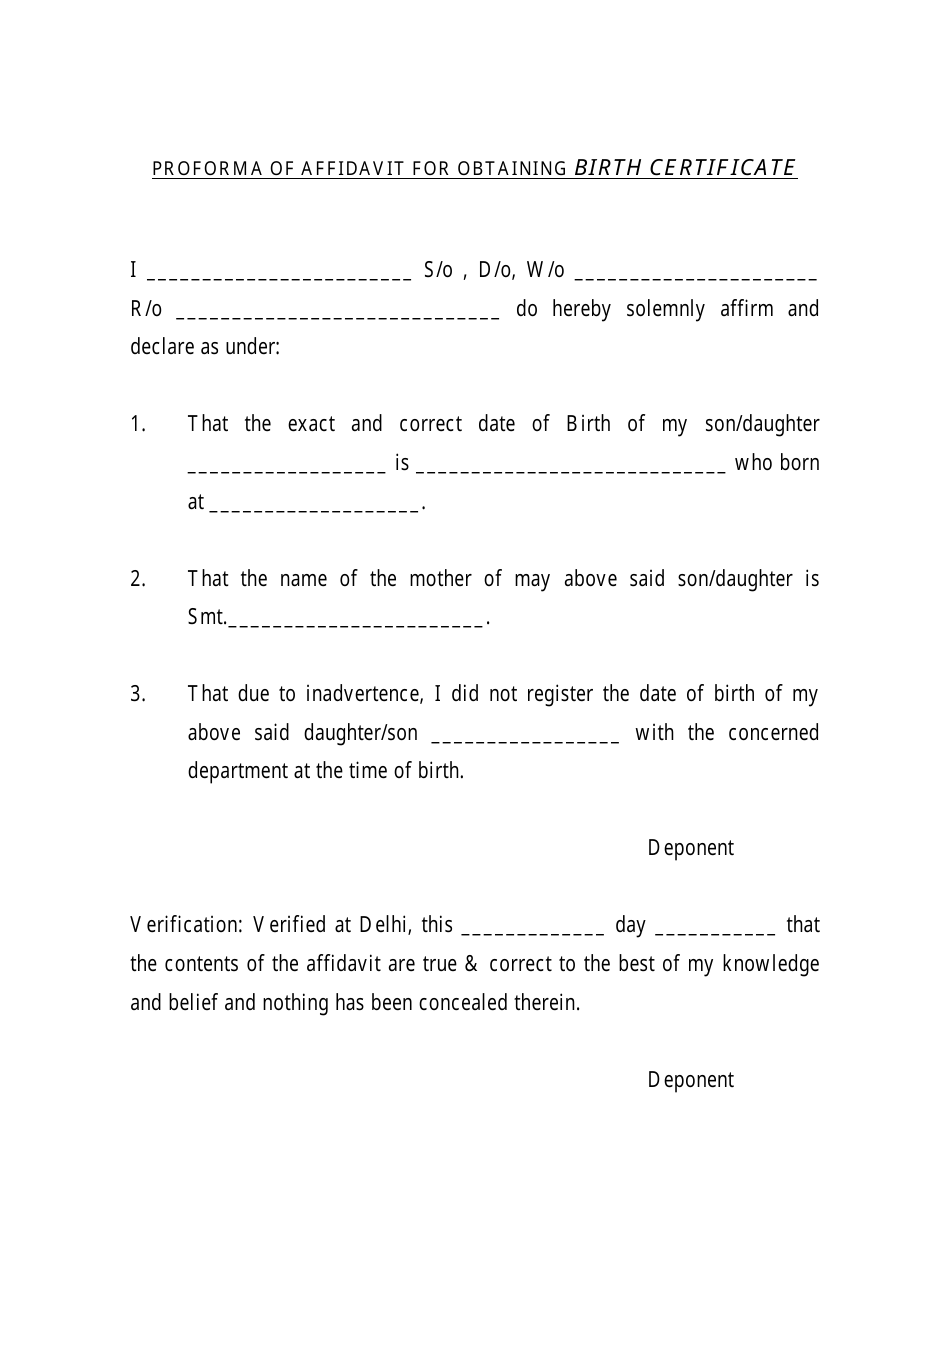 Proforma of Affidavit for Obtaining Birth Certificate, Page 1